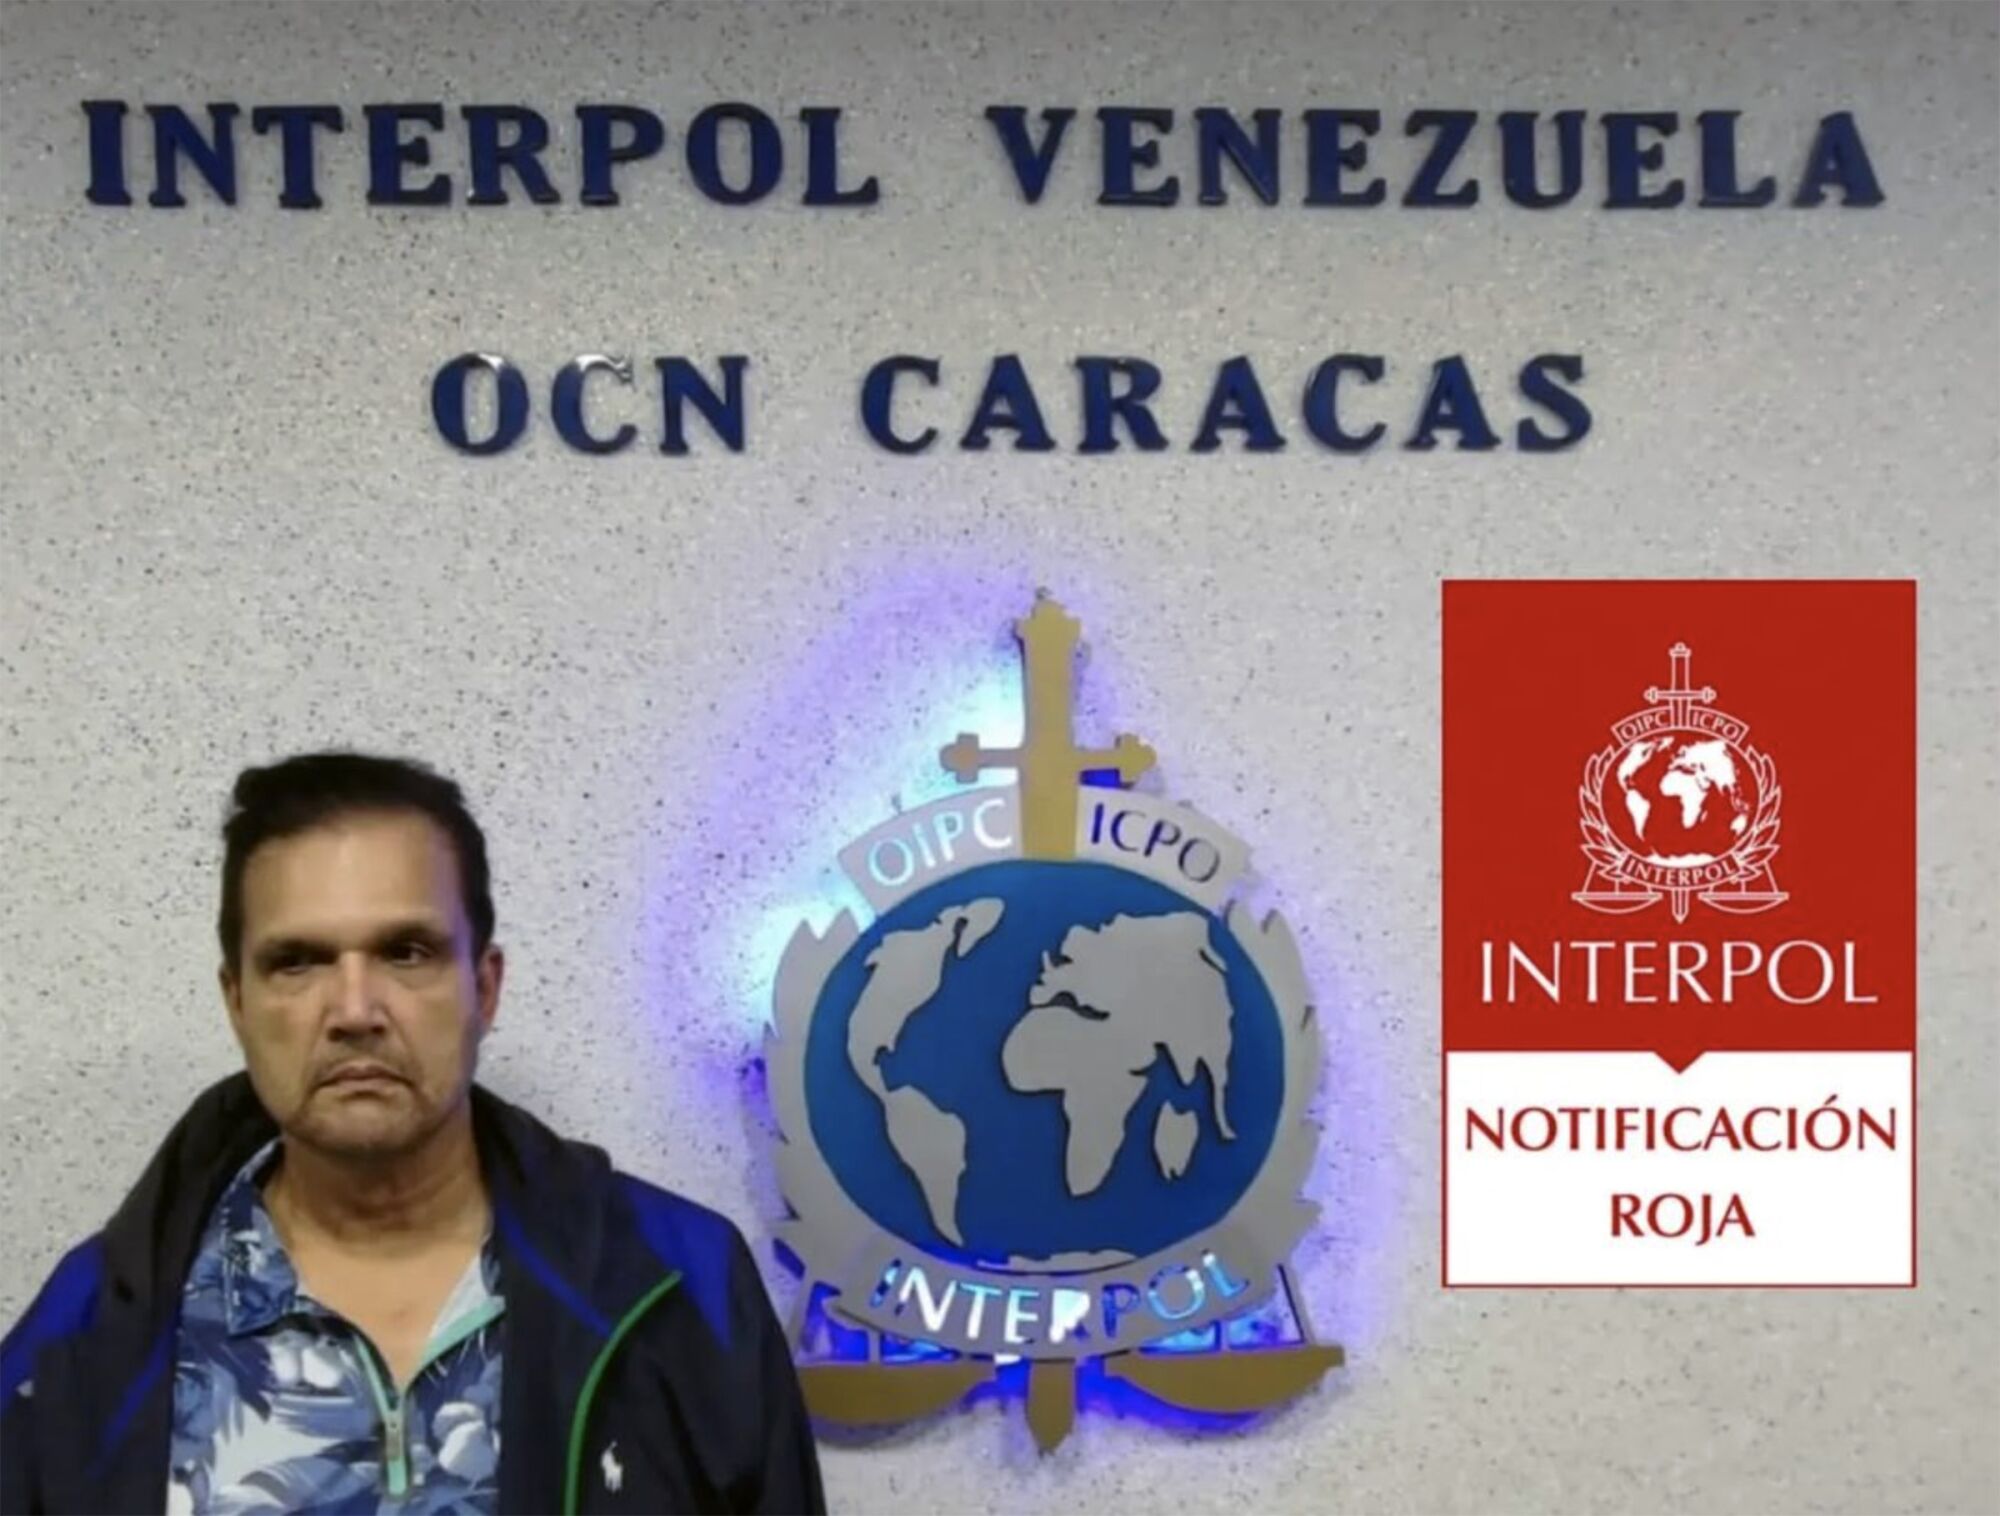 Leonard Francis is photographed at the Interpol offices in Caracas, Venezuela